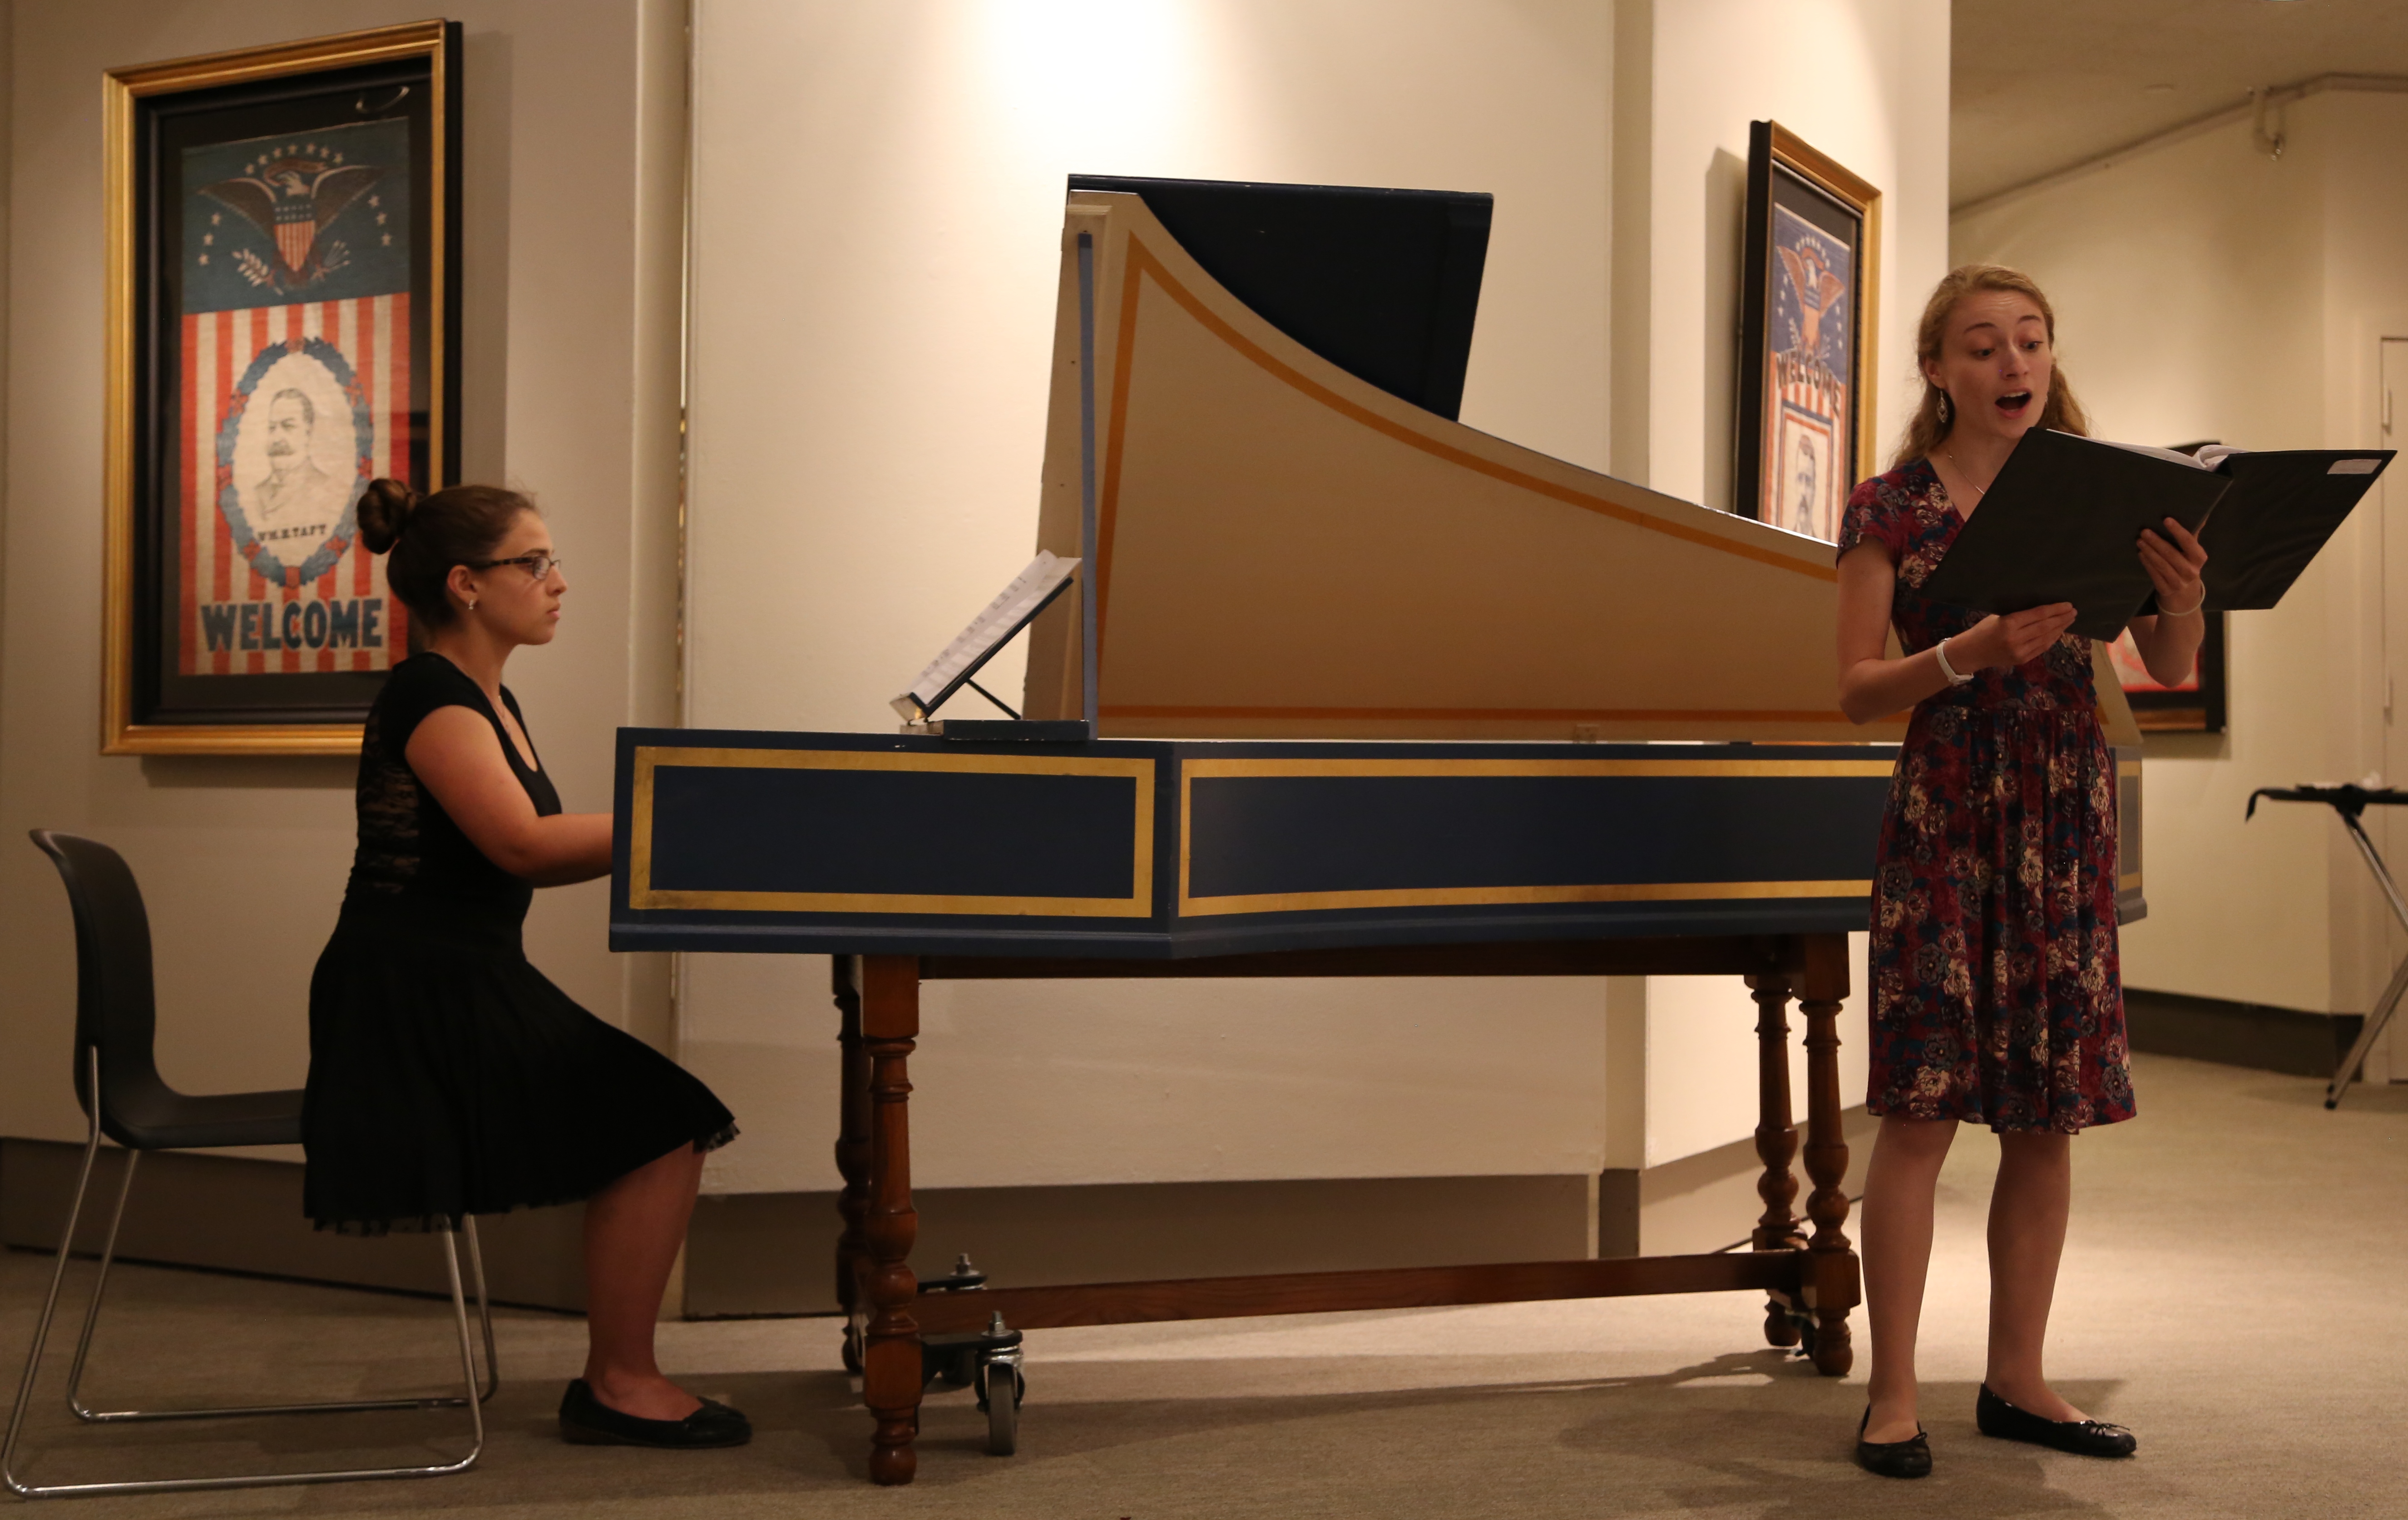 Christine Goss ’18 (SFA), playing the harpsichord, and soprano Sarah Himmelstein ’17 (SFA) are members of UConn’s Collegium Musicum who will perform 'Shakespeare’s Songbook' music from the plays of William Shakespeare at 8 p.m., on Friday, Sept. 23 at the William Benton Museum of Art. (Photo by Matthew Pugliese.)